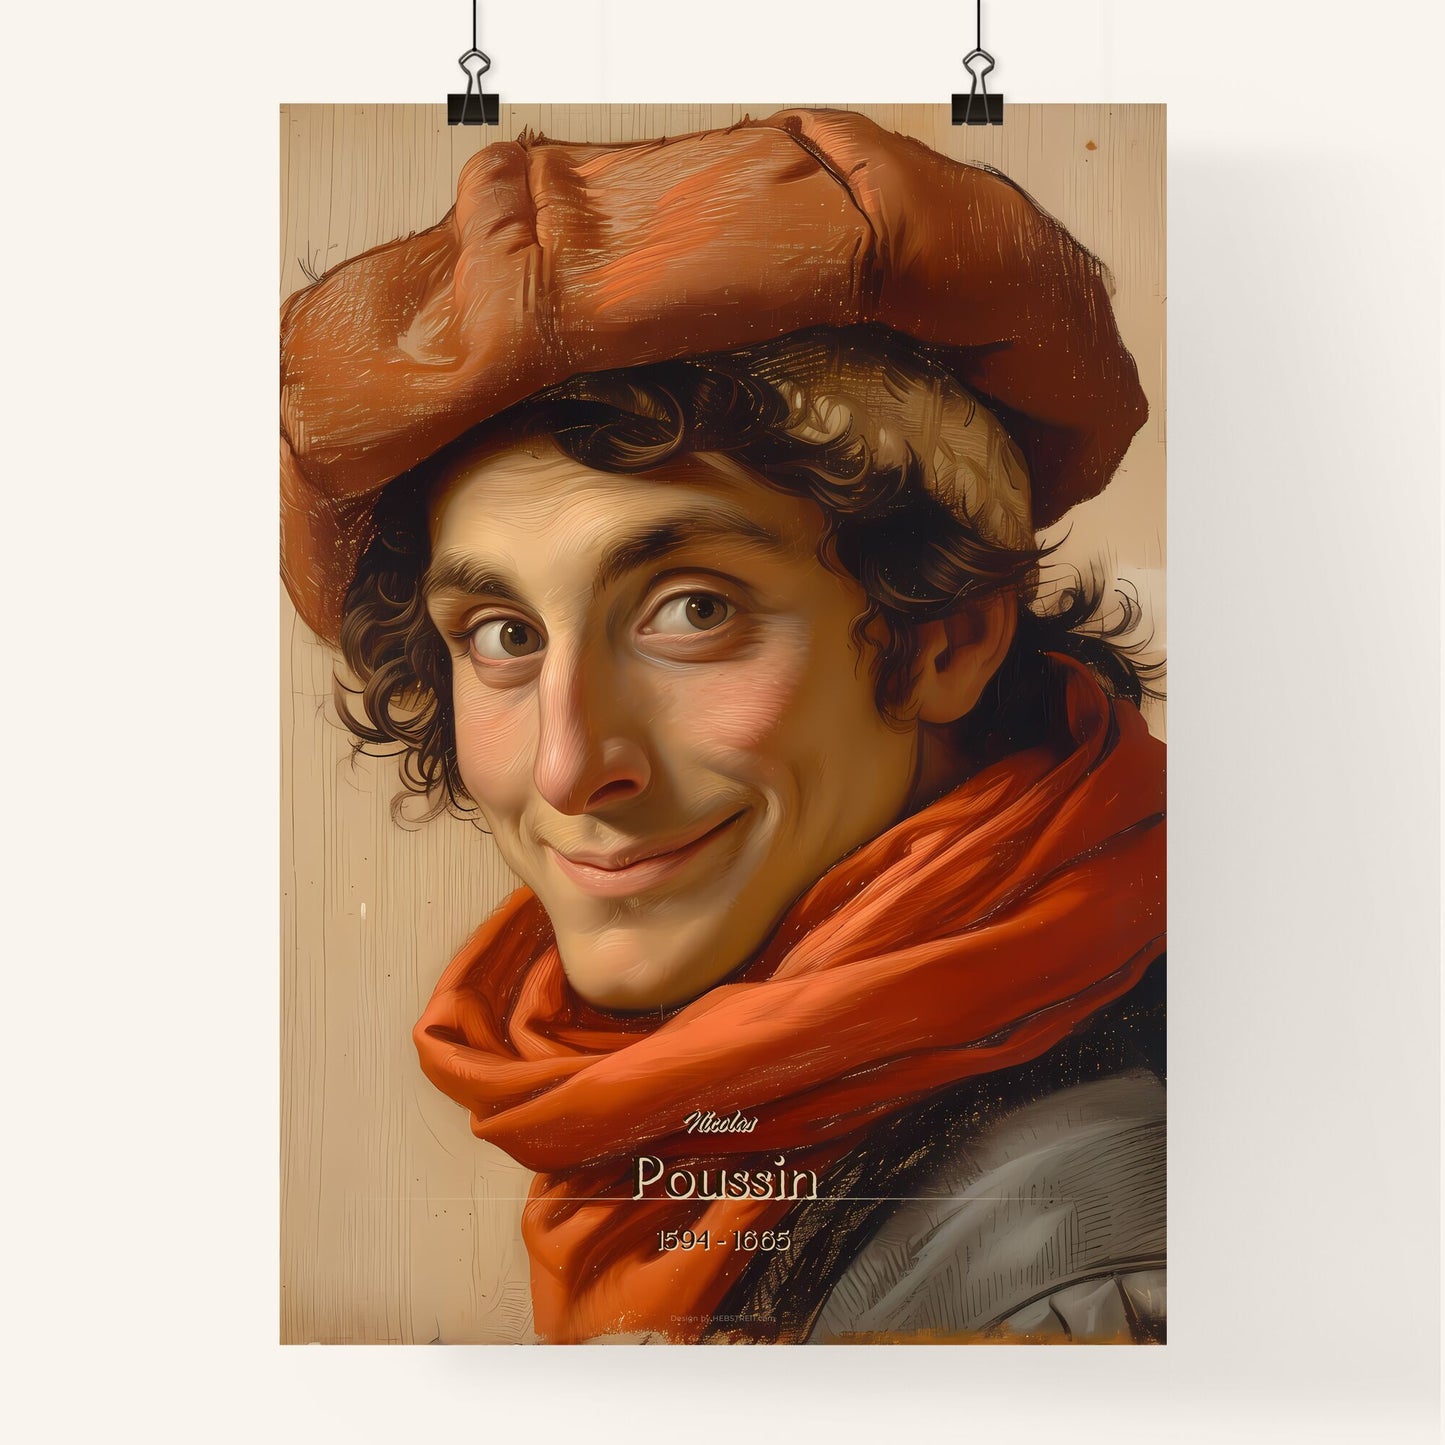 Nicolas, Poussin, 1594 - 1665, A Poster of a man wearing a hat and scarf Default Title